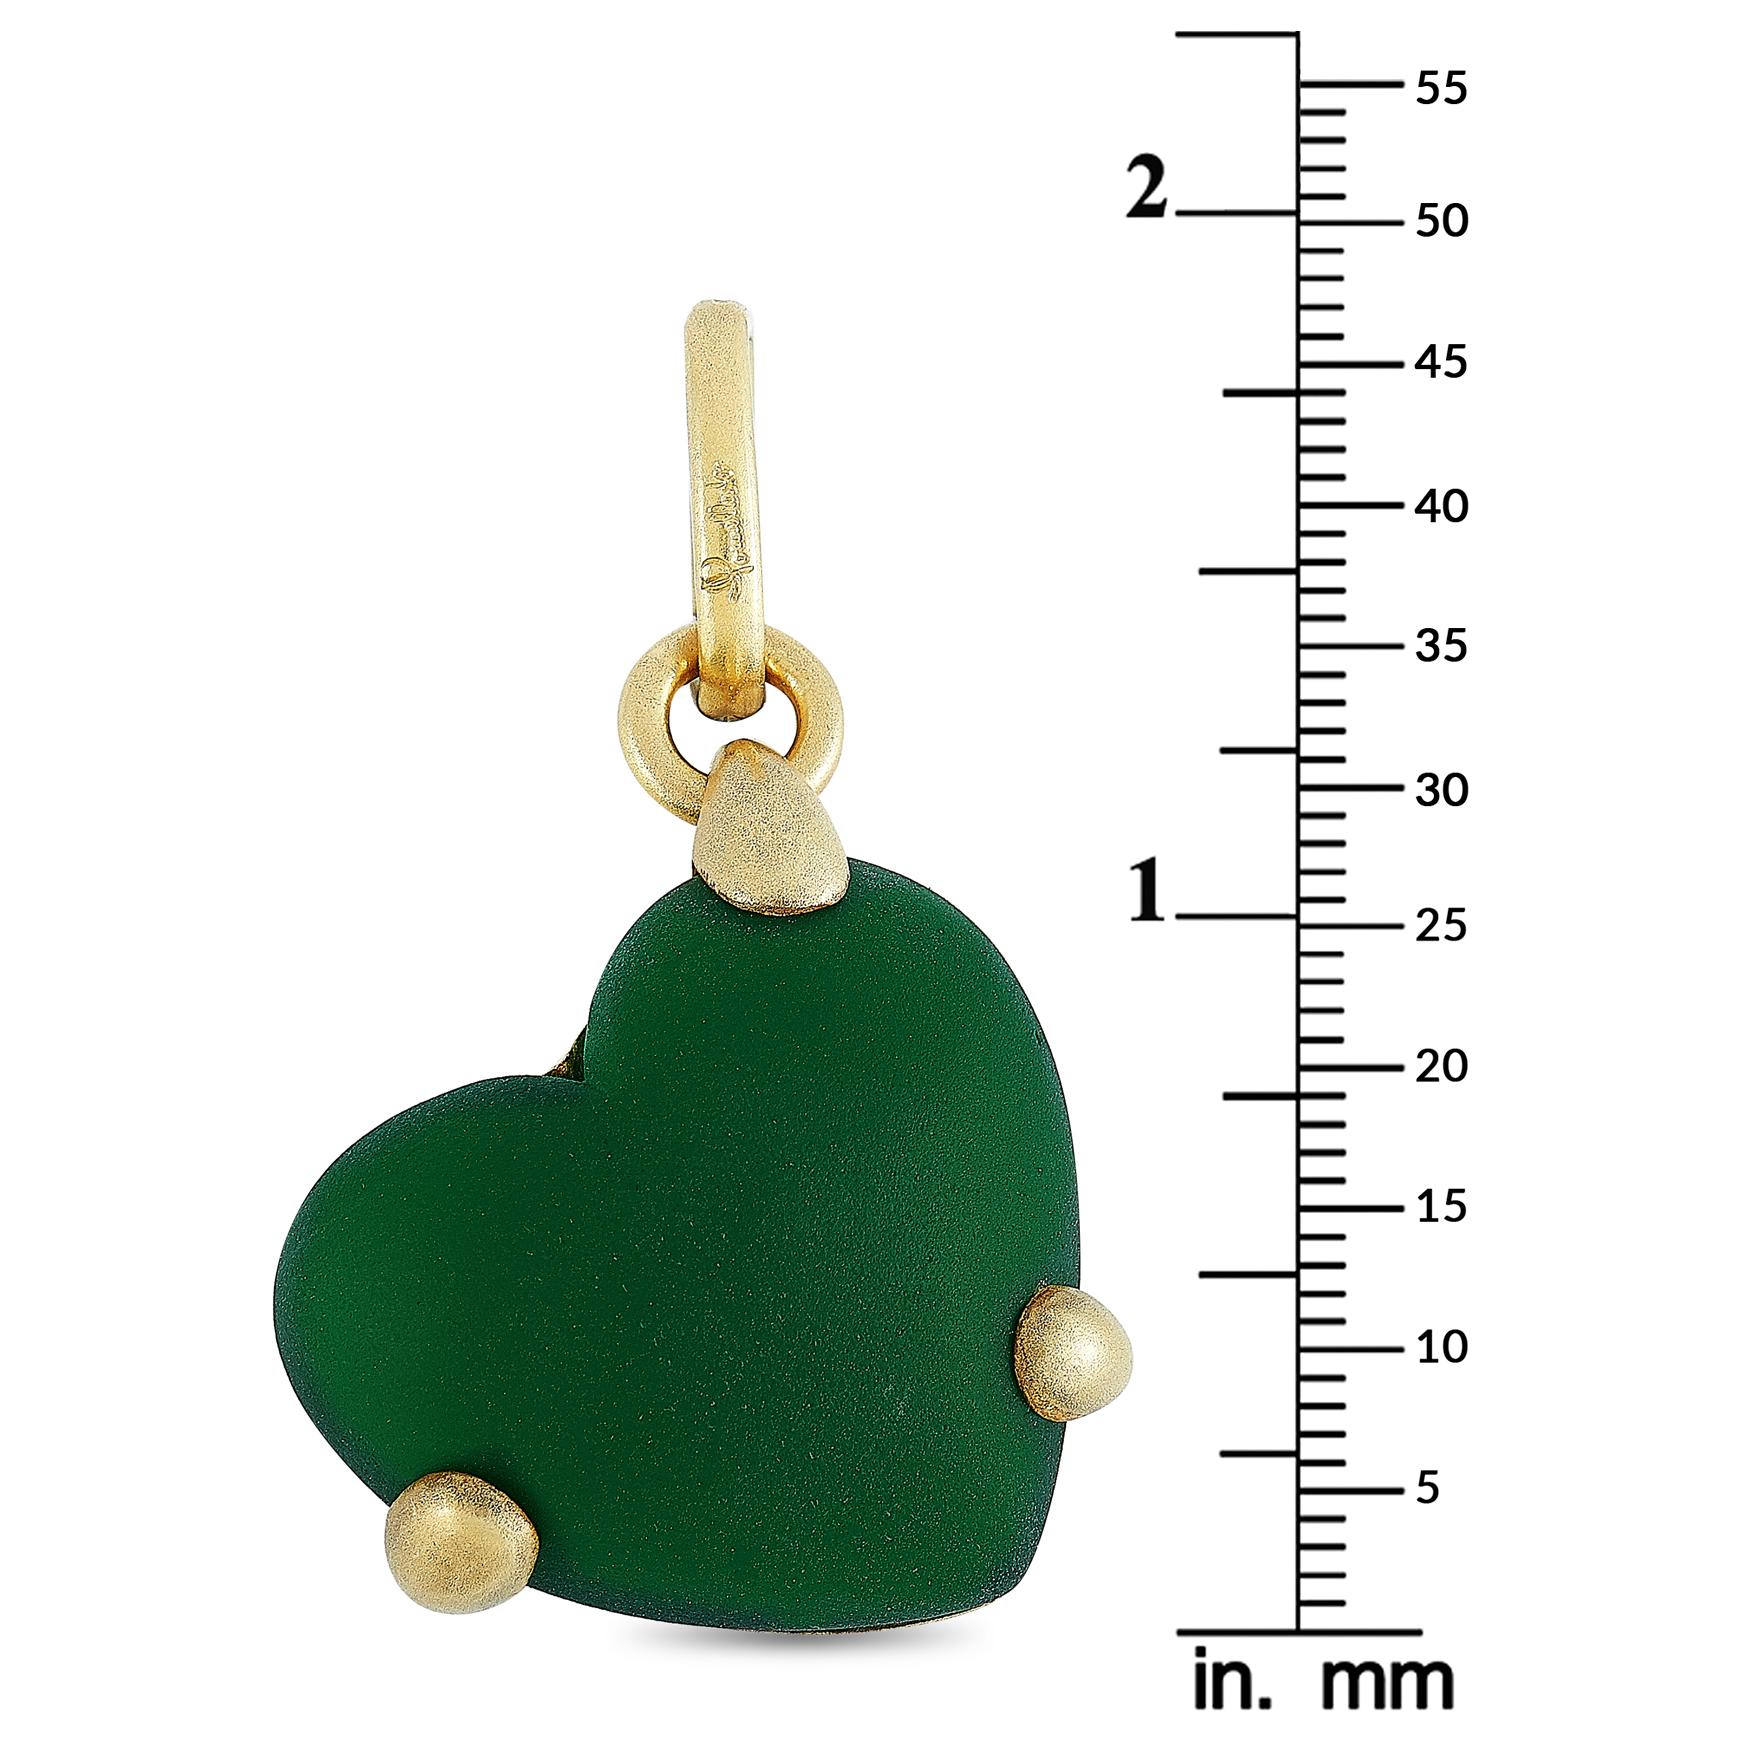 This Pomellato pendant is made out of 18K yellow gold and malachite and weighs 23 grams. The pendant measures 1.87” in length and 1.12” in width.

Offered in estate condition, this item includes the manufacturer’s box.